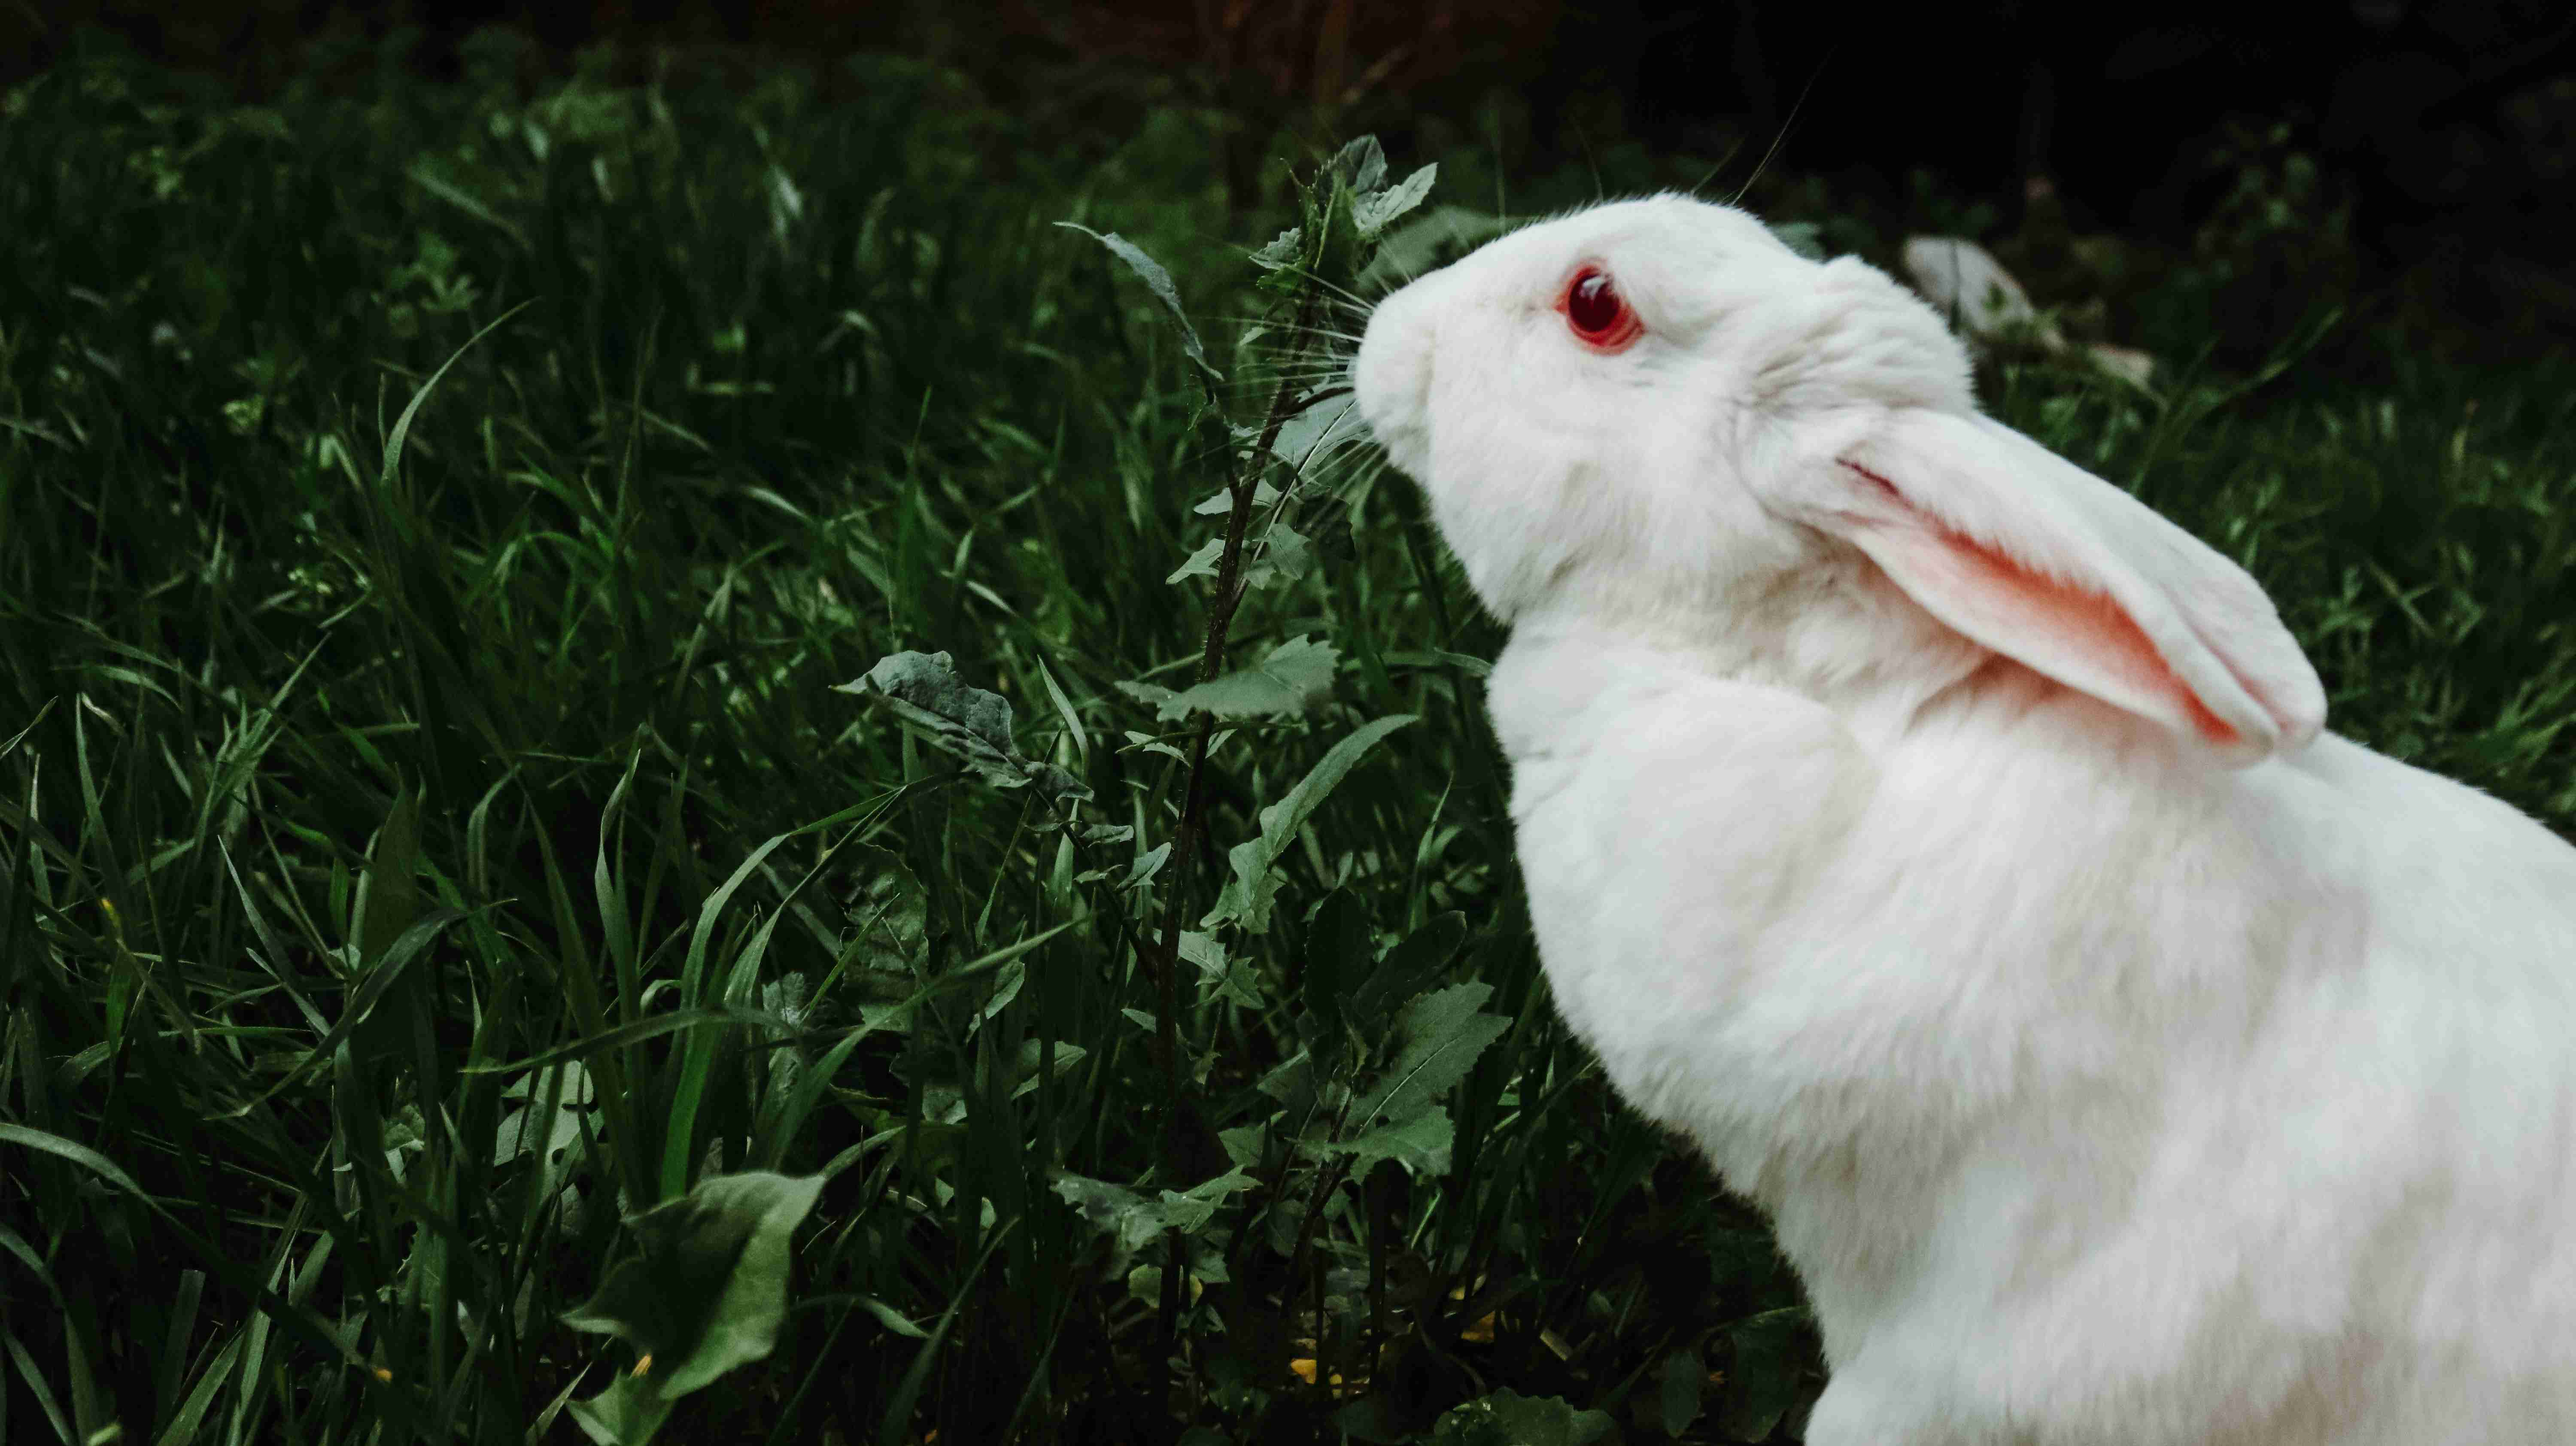 Rabbit Dental Health 101: How to Properly Check Your Rabbit's Teeth for Problems